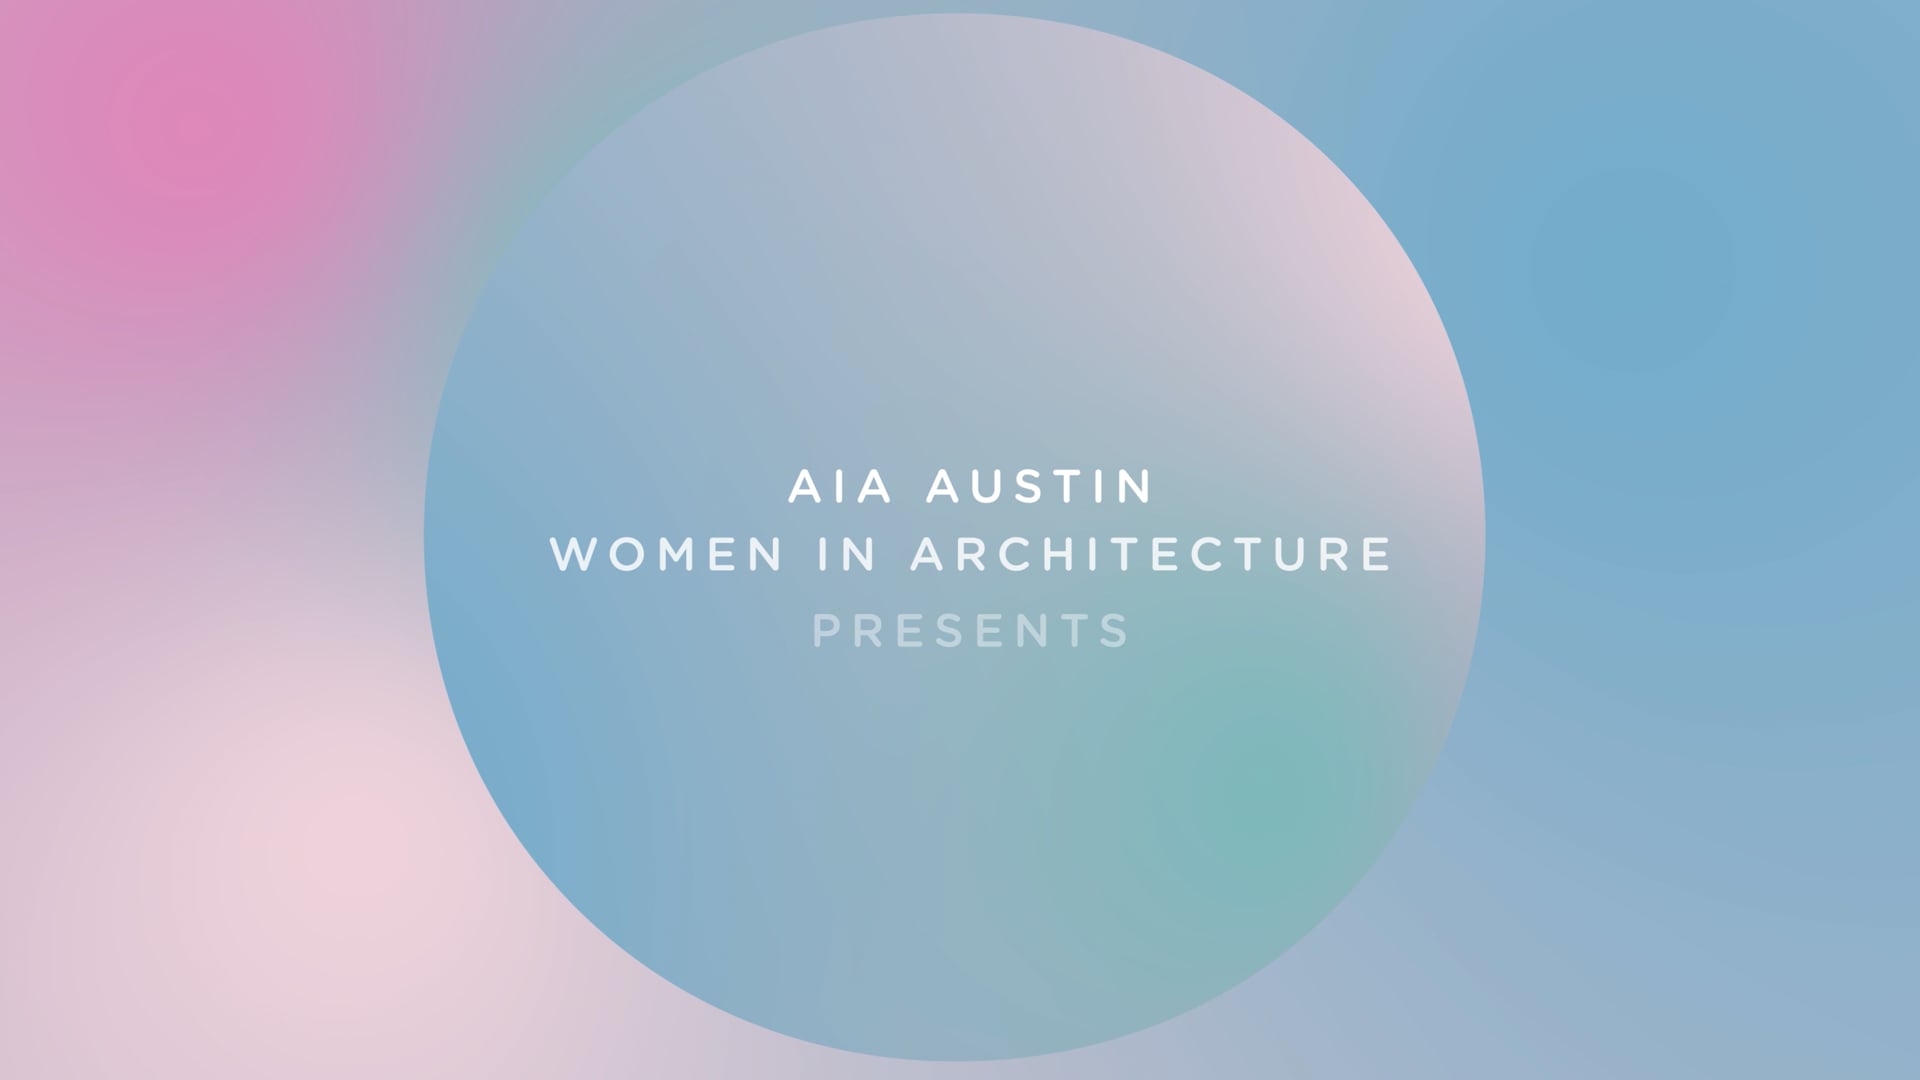 AIA Austin WiA - 'Profiles' 2022 - Lucy Begg, AIA Architect & Co-Director Thoughtbarn